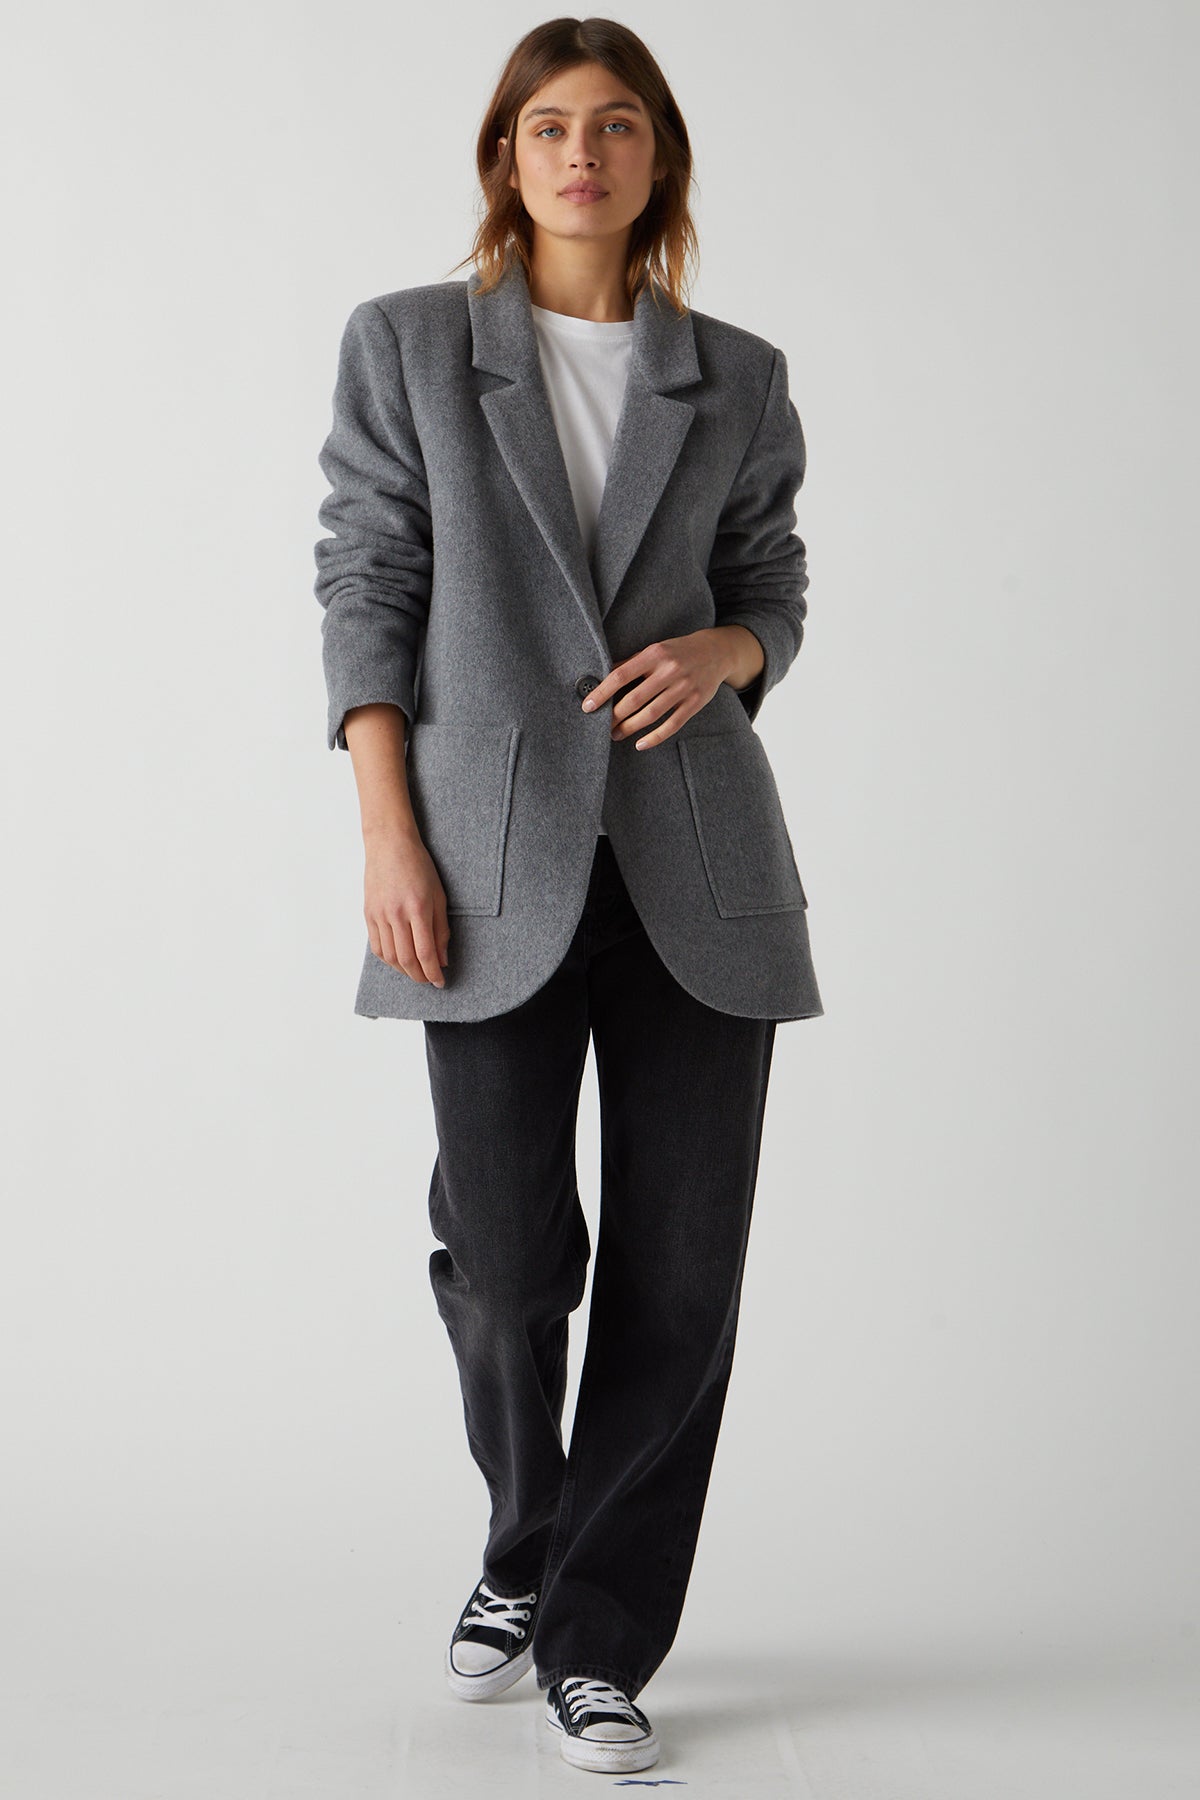 The model is wearing an ALAMOS blazer and black jeans. (brand: Velvet by Jenny Graham)-25483348803777